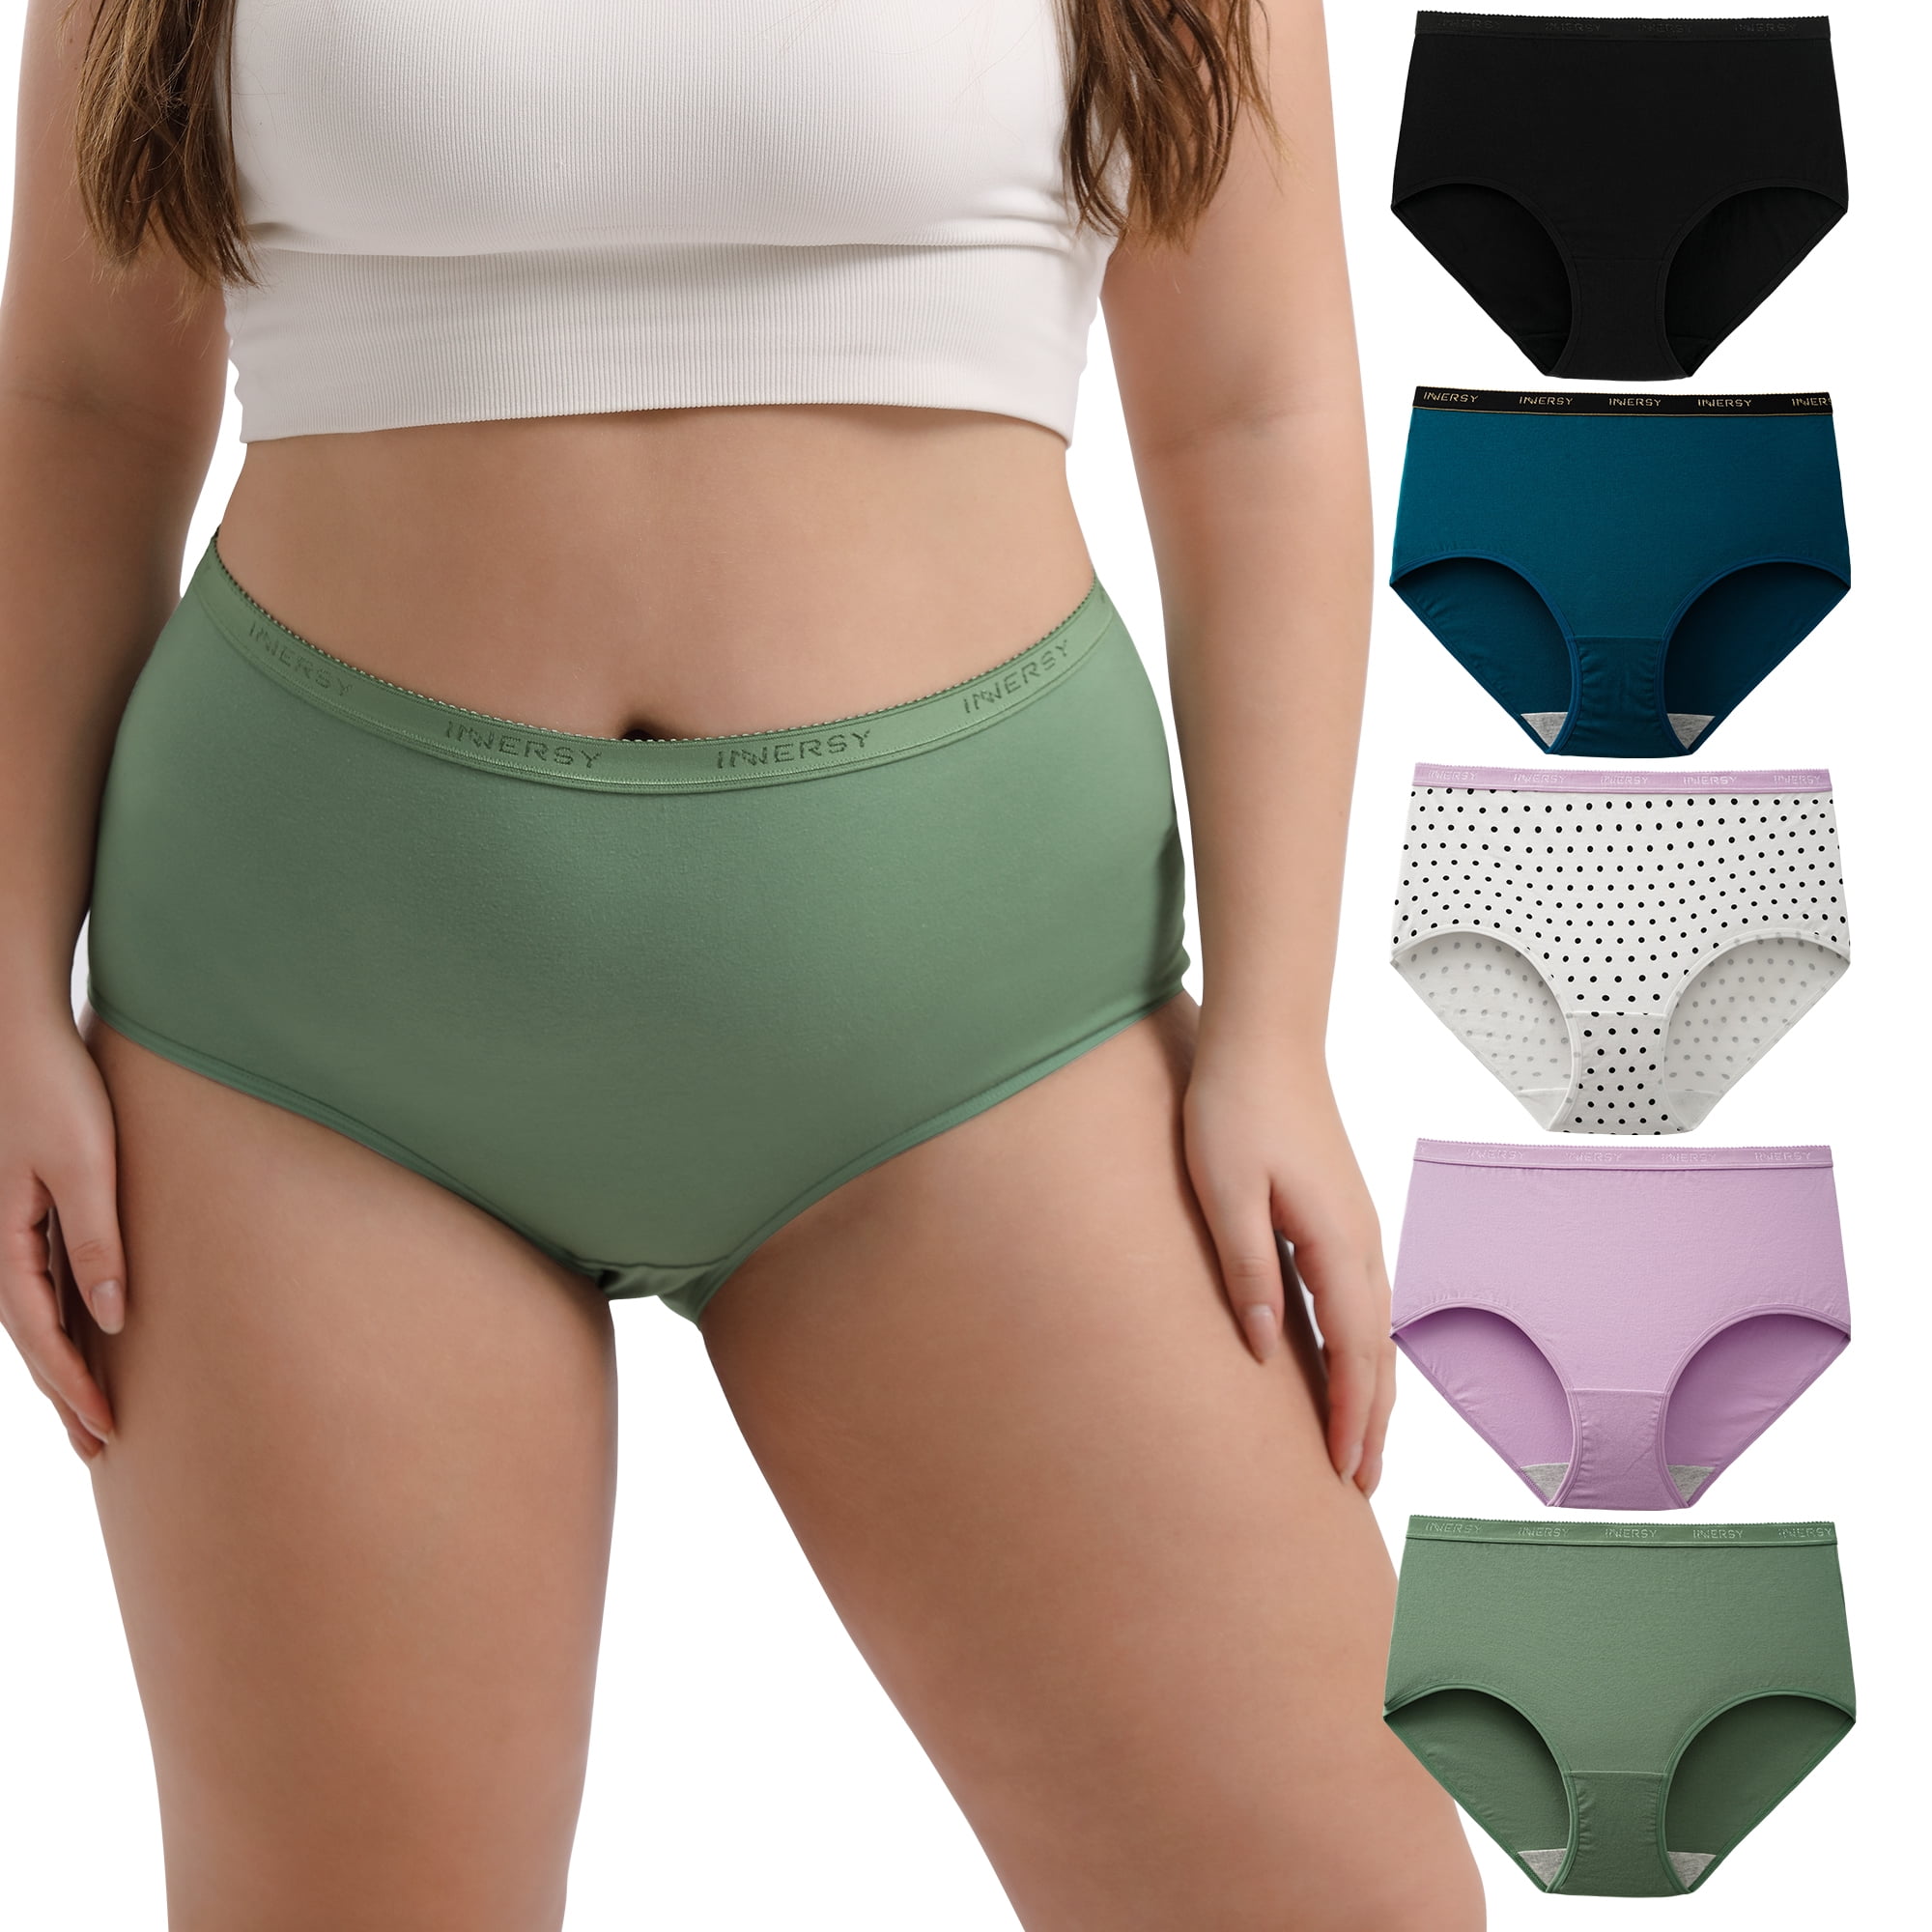 INNERSY Women's Maxi Briefs High Waisted Underwear Women Cotton Plus Size  Knickers 16-32 Pack of 4